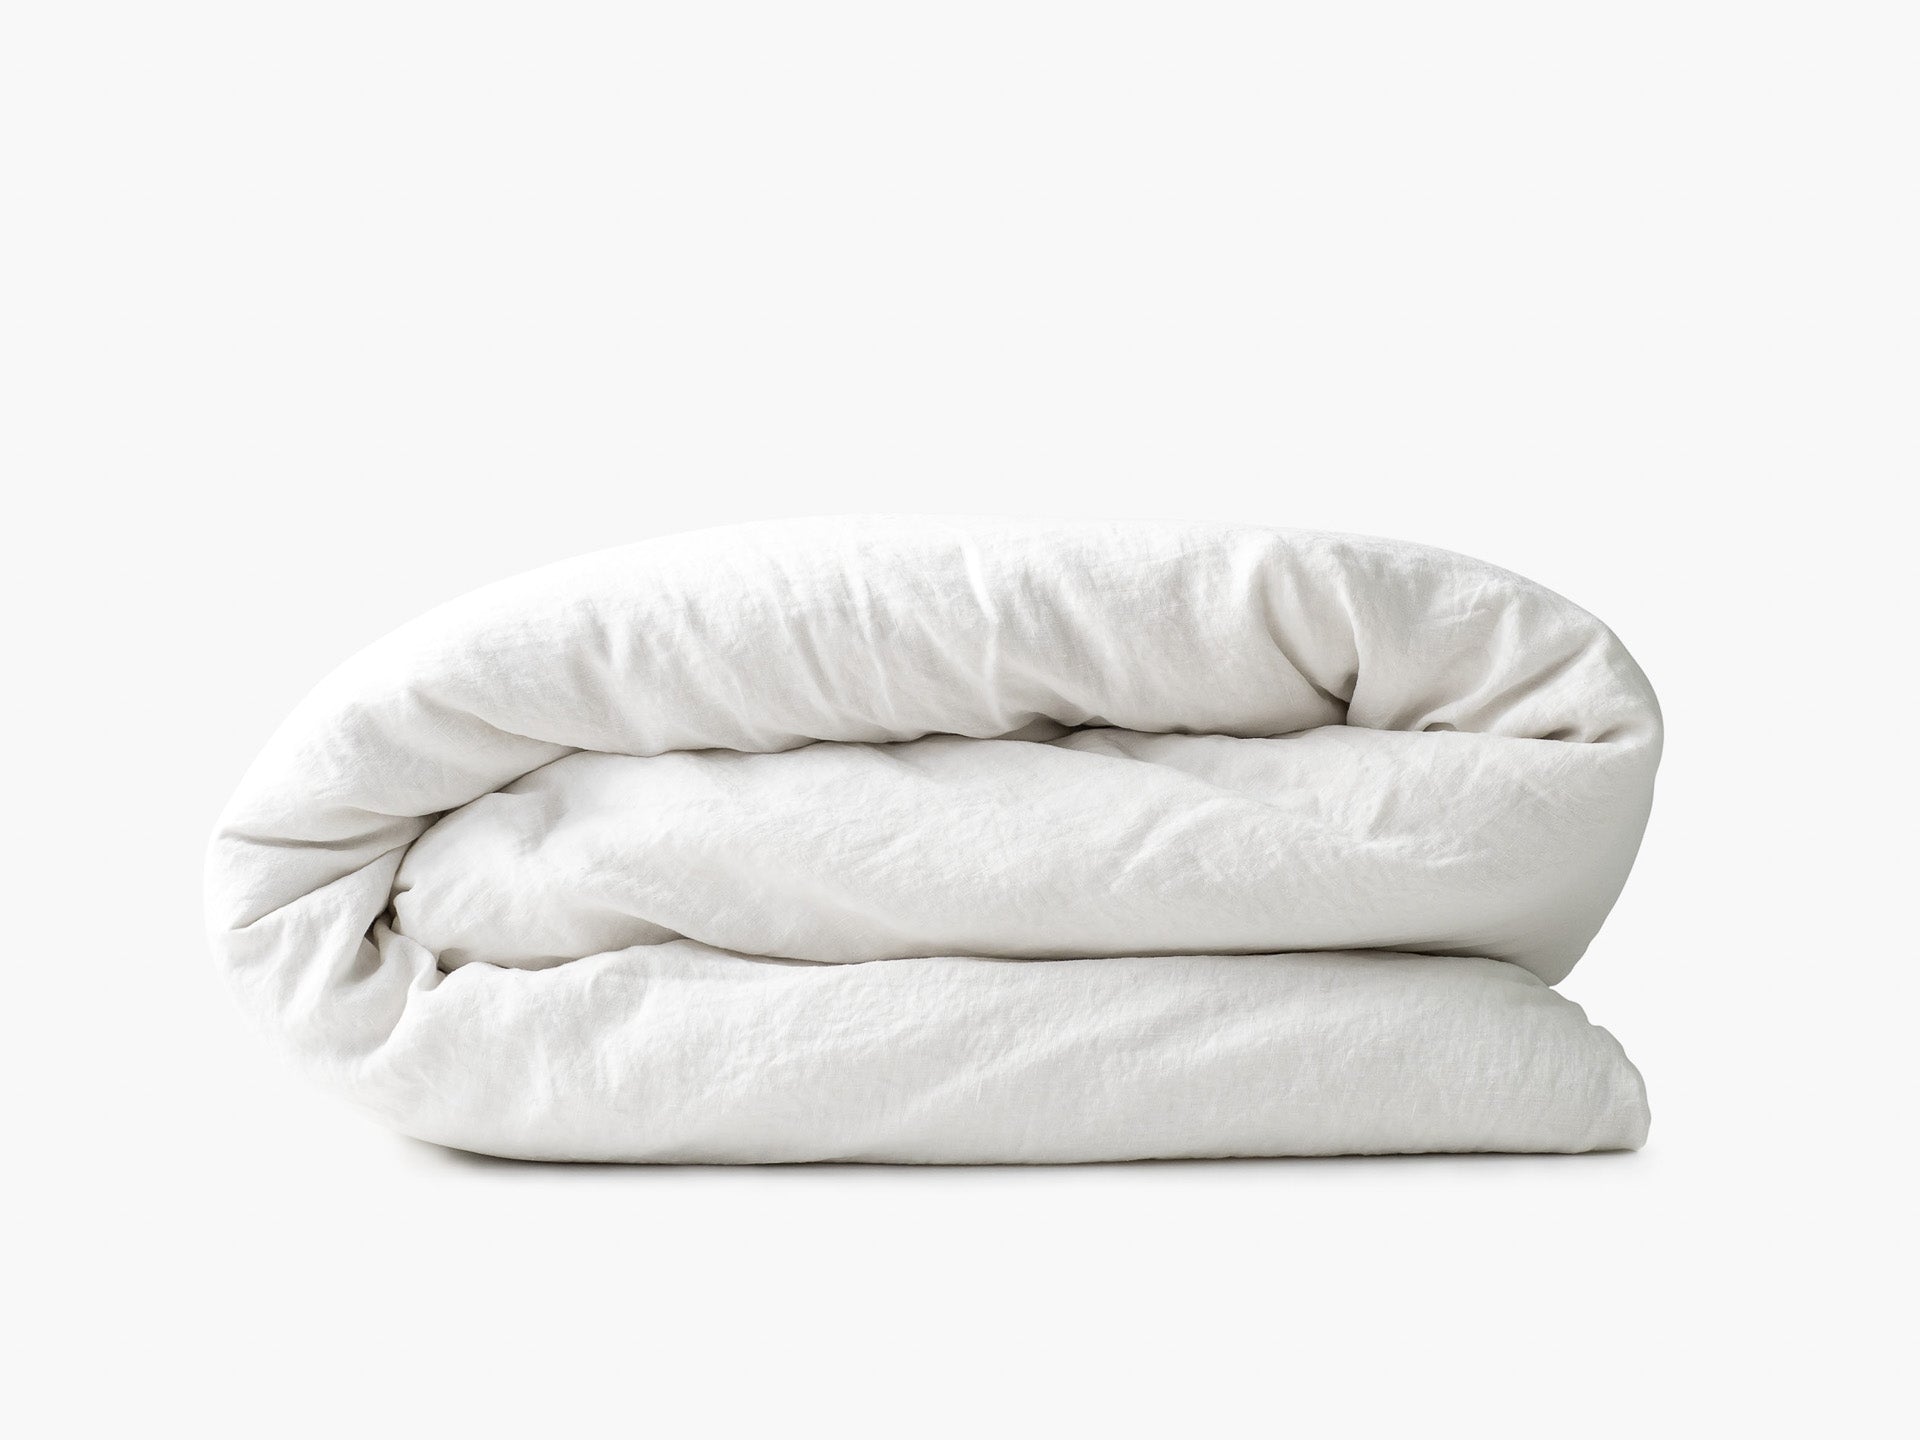 Softened Linen Duvet Cover in Off White by Lagódie